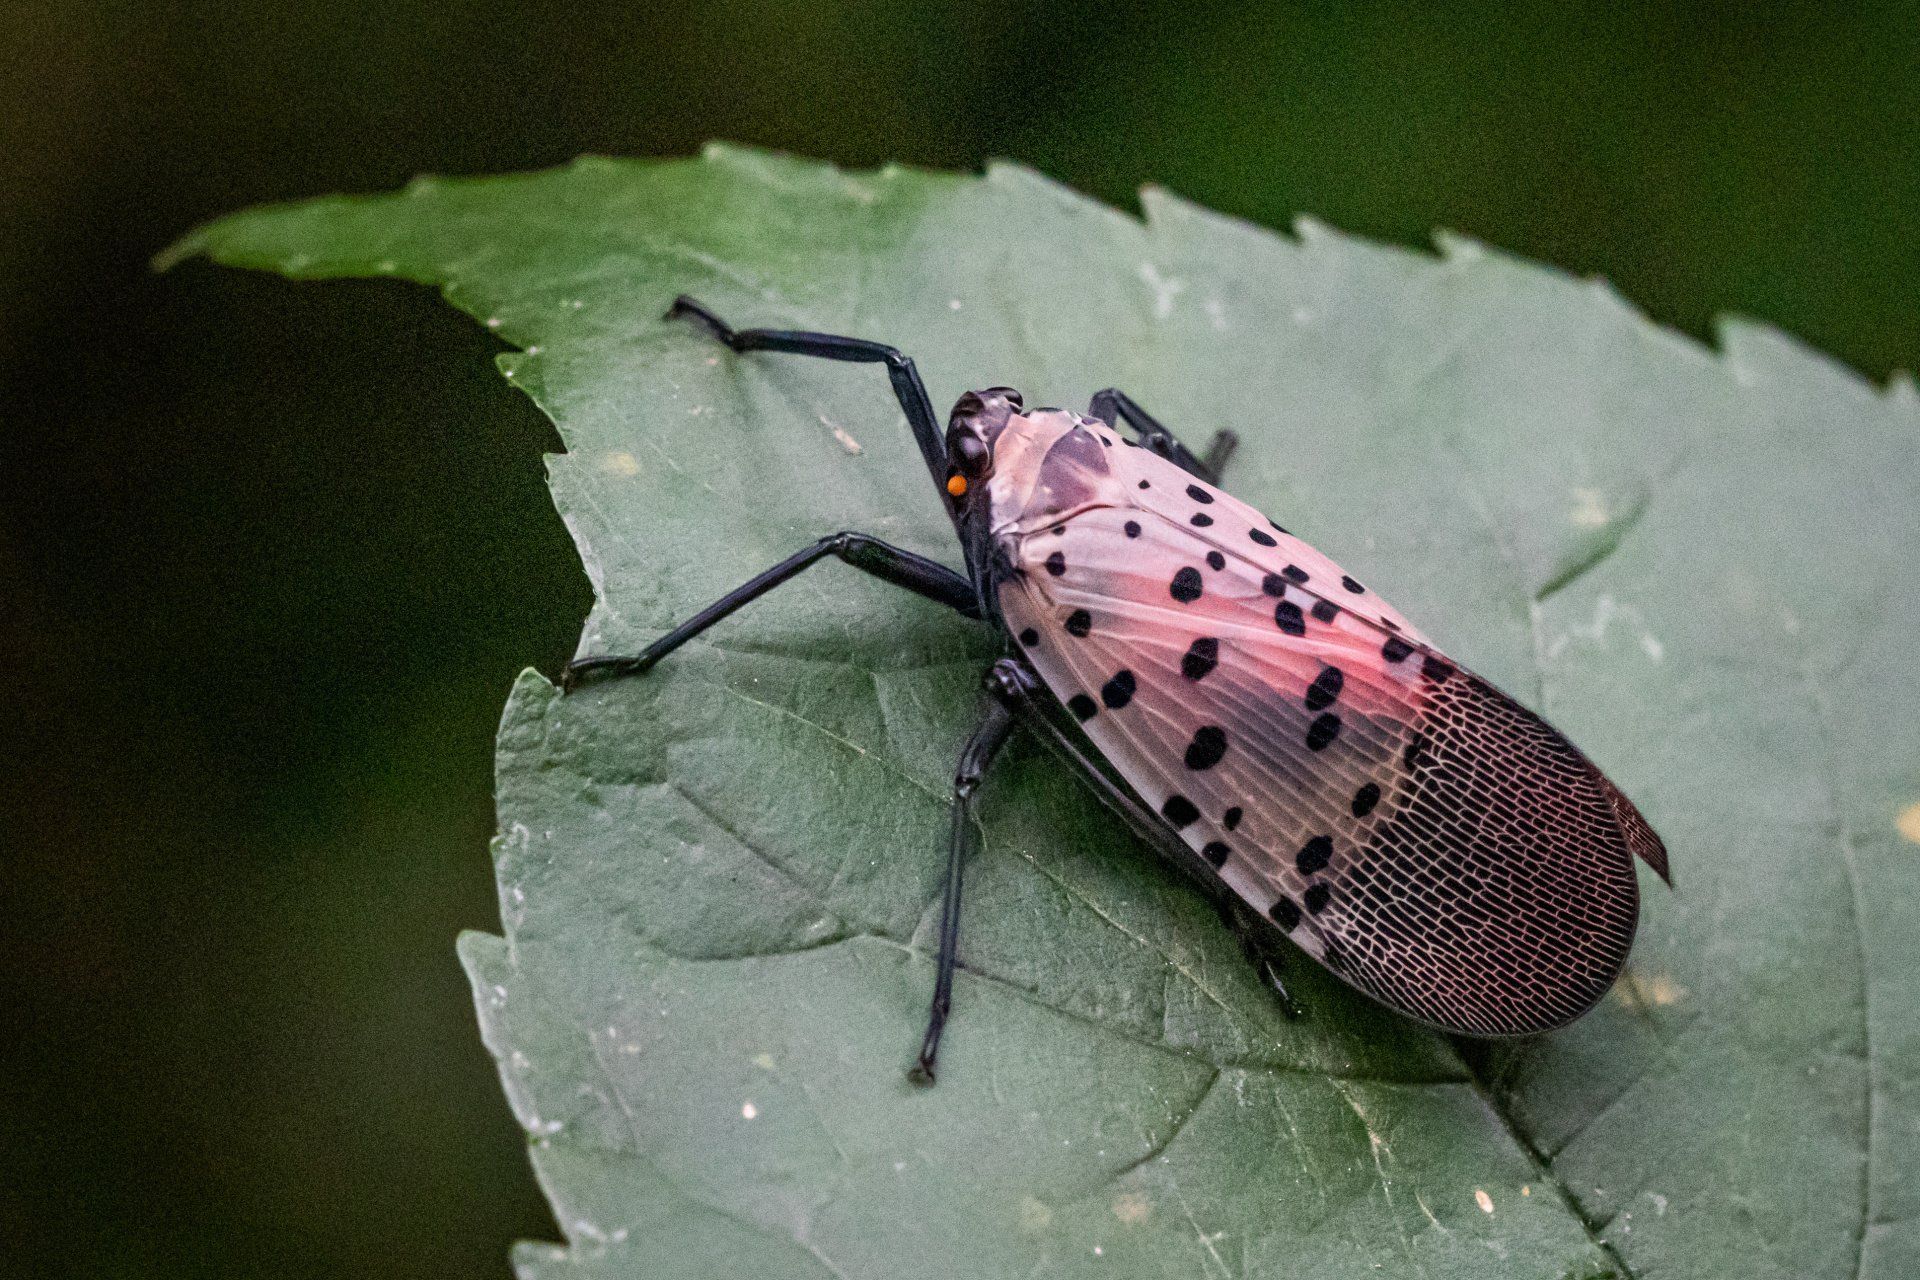 Adult spotted lanternfly with closed wings